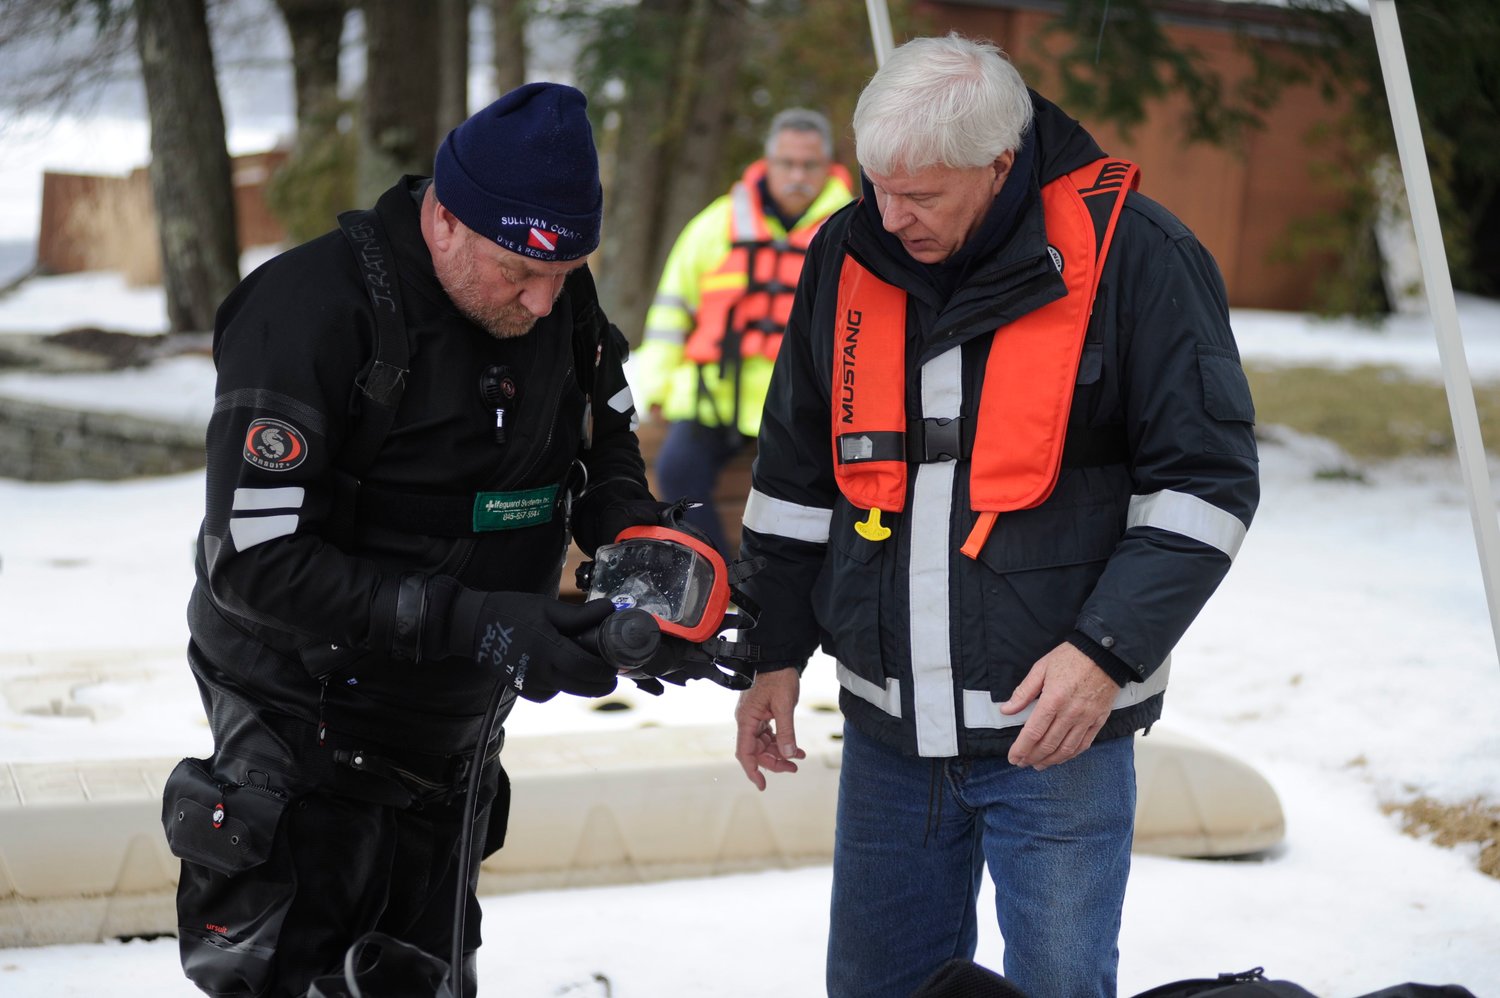 Sullivan County Dive & Rescue Team captain Joe Ratner, left, and co-captain Warren Wagner are pictured making adjustments to a diving mask assembly.